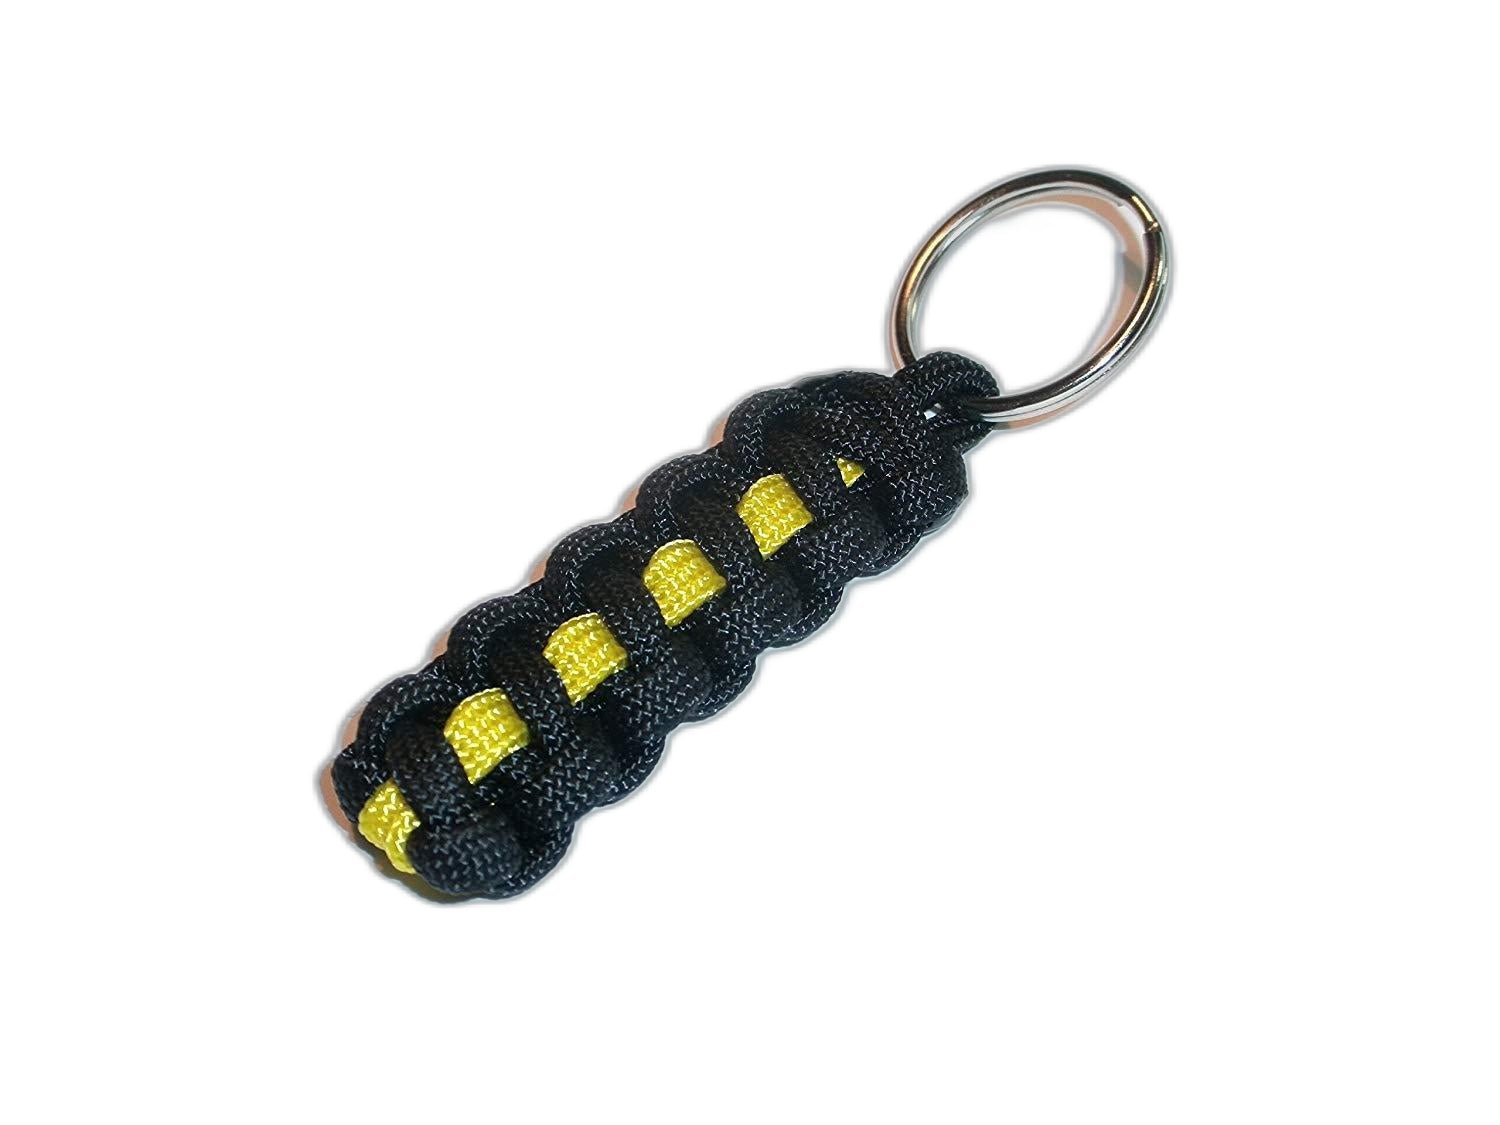 Thin Yellow Line Paracord 550 Type III